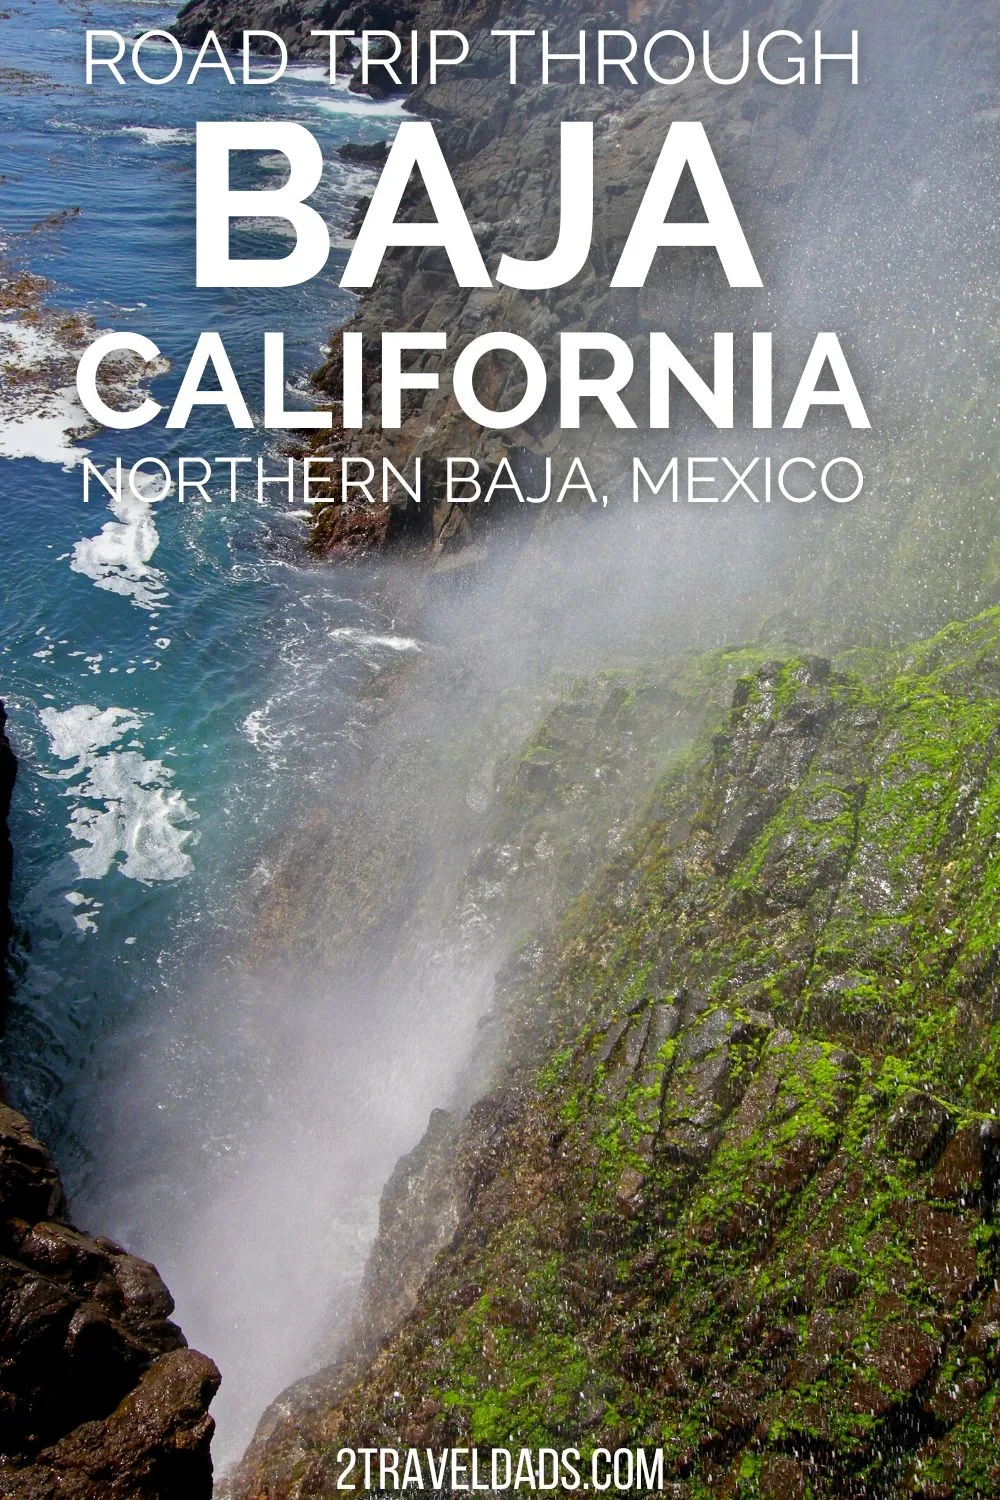 This Baja California road trip around Northern Baja is fun, beautiful and a different sort of Mexico vacation. From beaches to wineries, missions to hiking this is an awesome Mexican adventure.